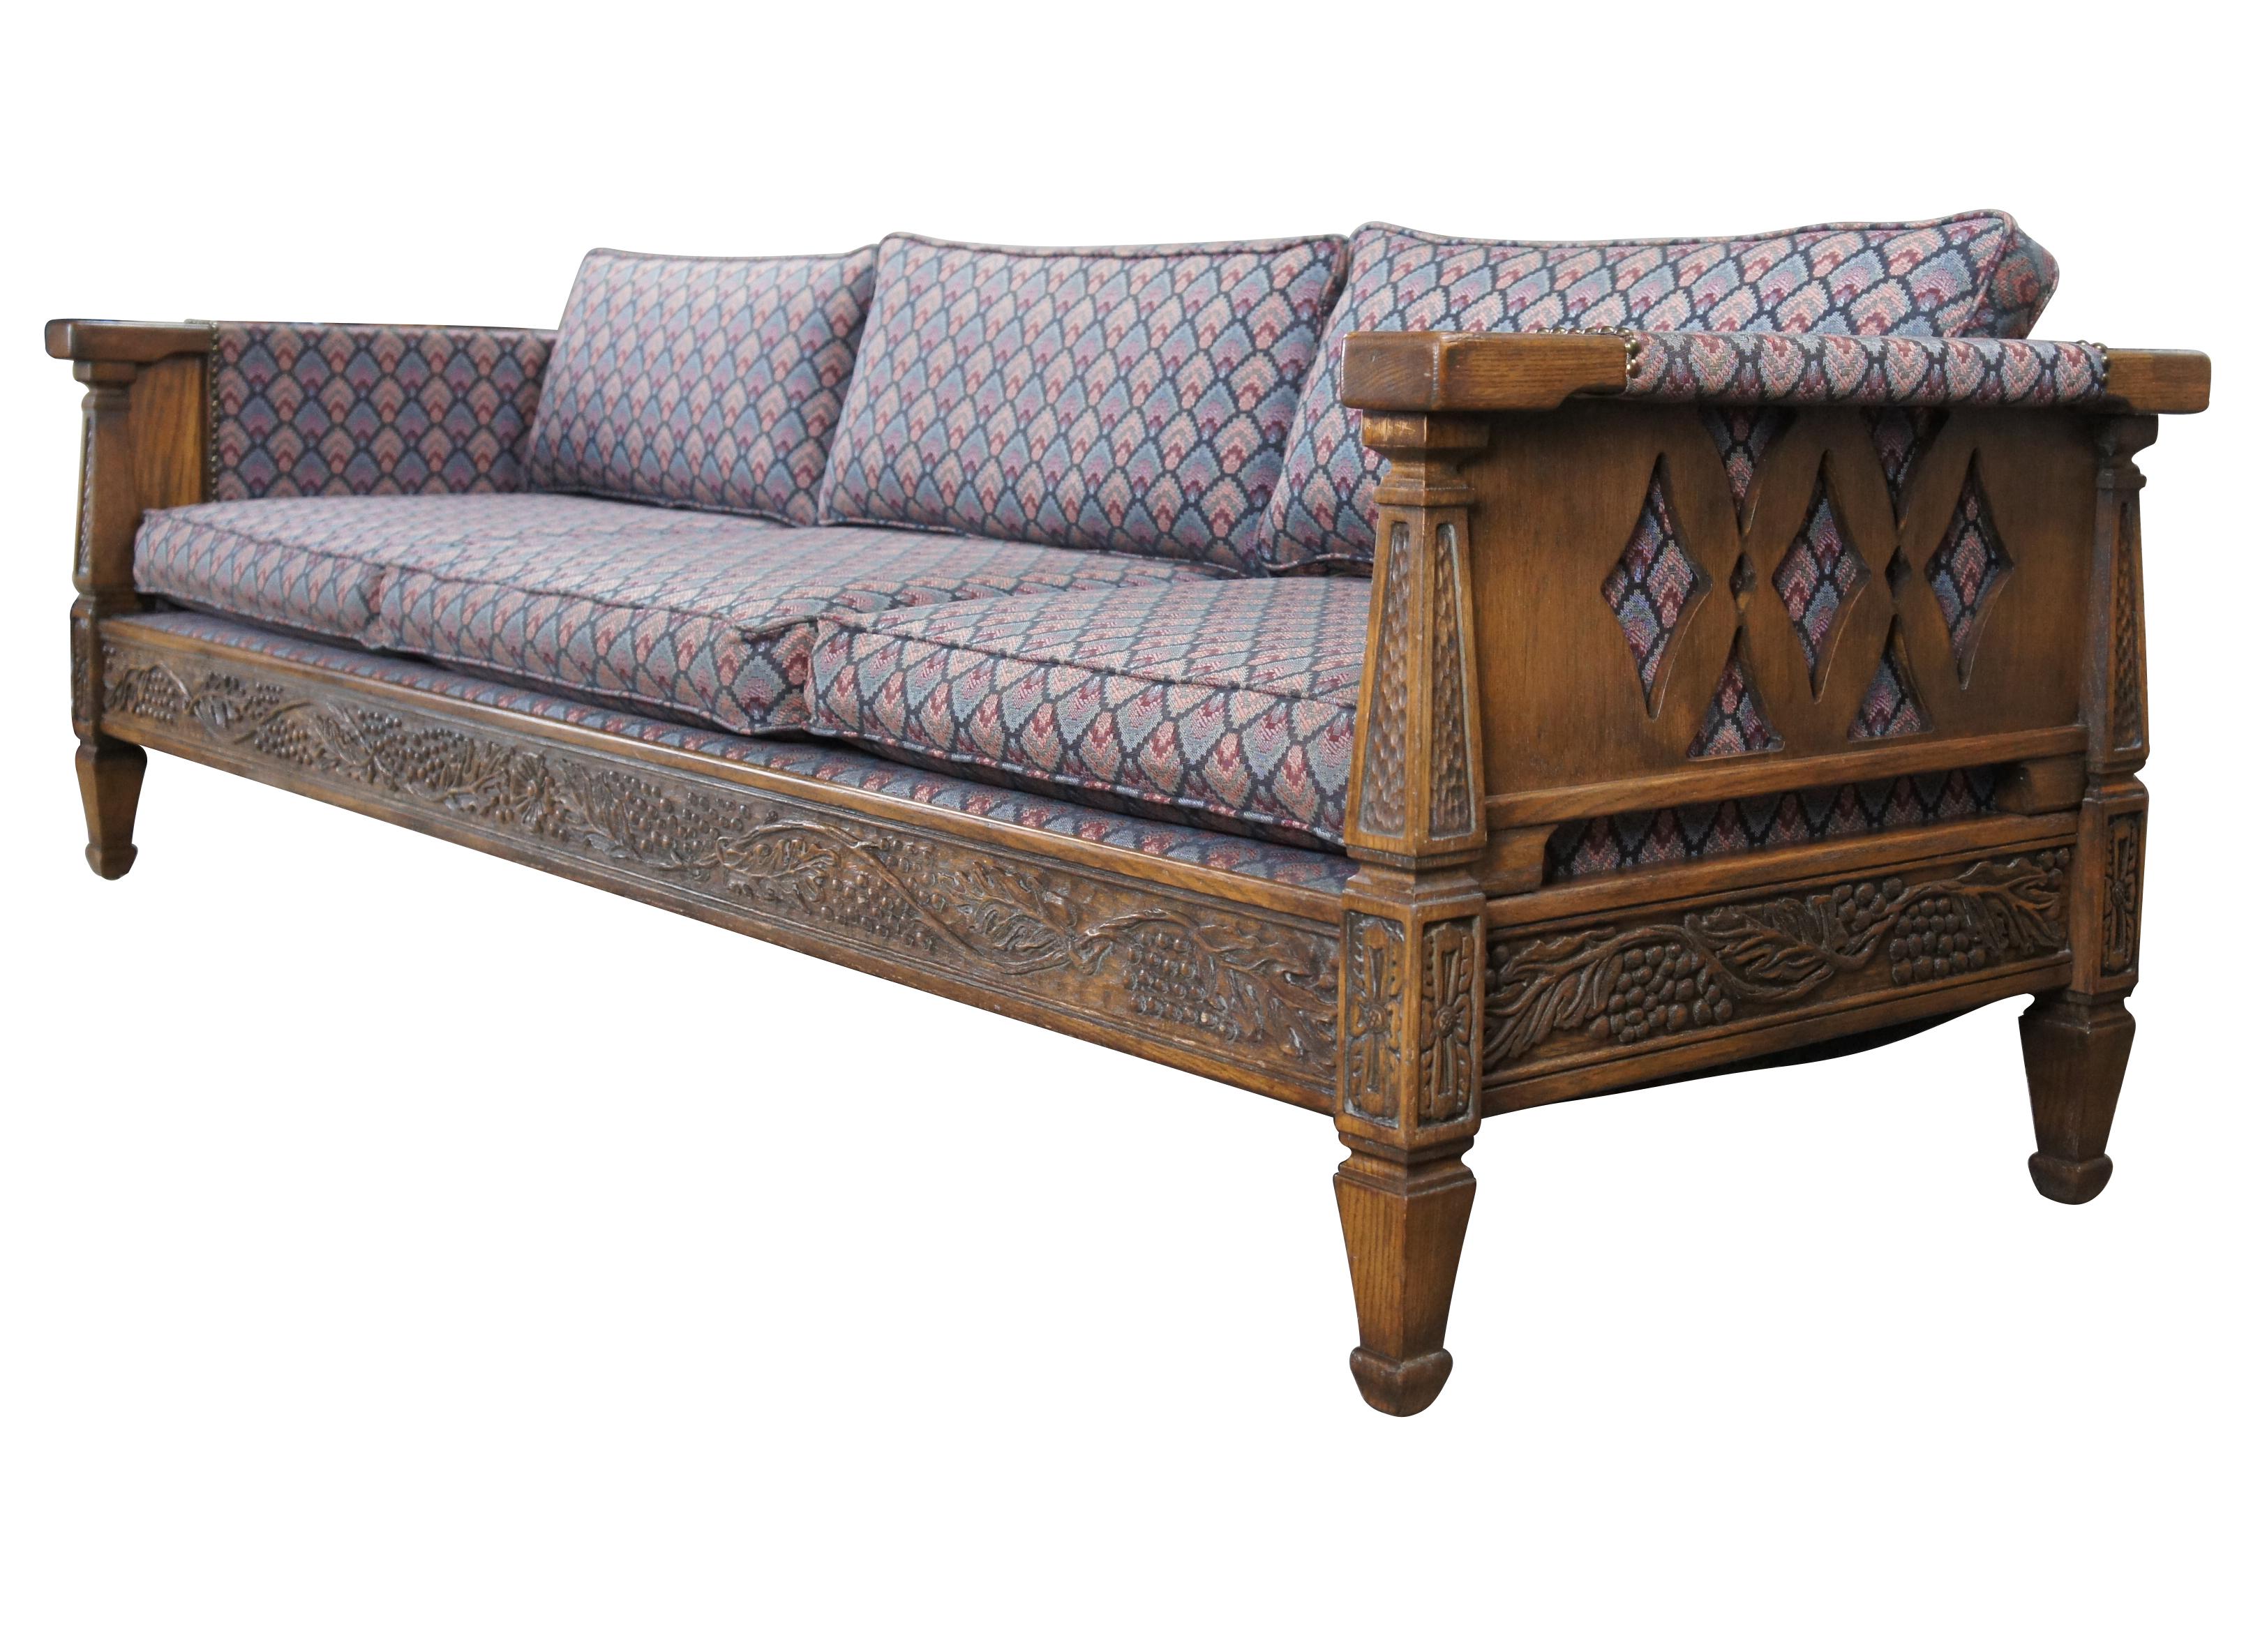 Romweber (R-13490) Viking oak three seat sofa / couch, circa 1984. Features rectangular carved oak frame with grapevine motif, tooled pillars and floral embellishments. Upholstered in a retro fan pattern with nail head trim along the arms. Outer